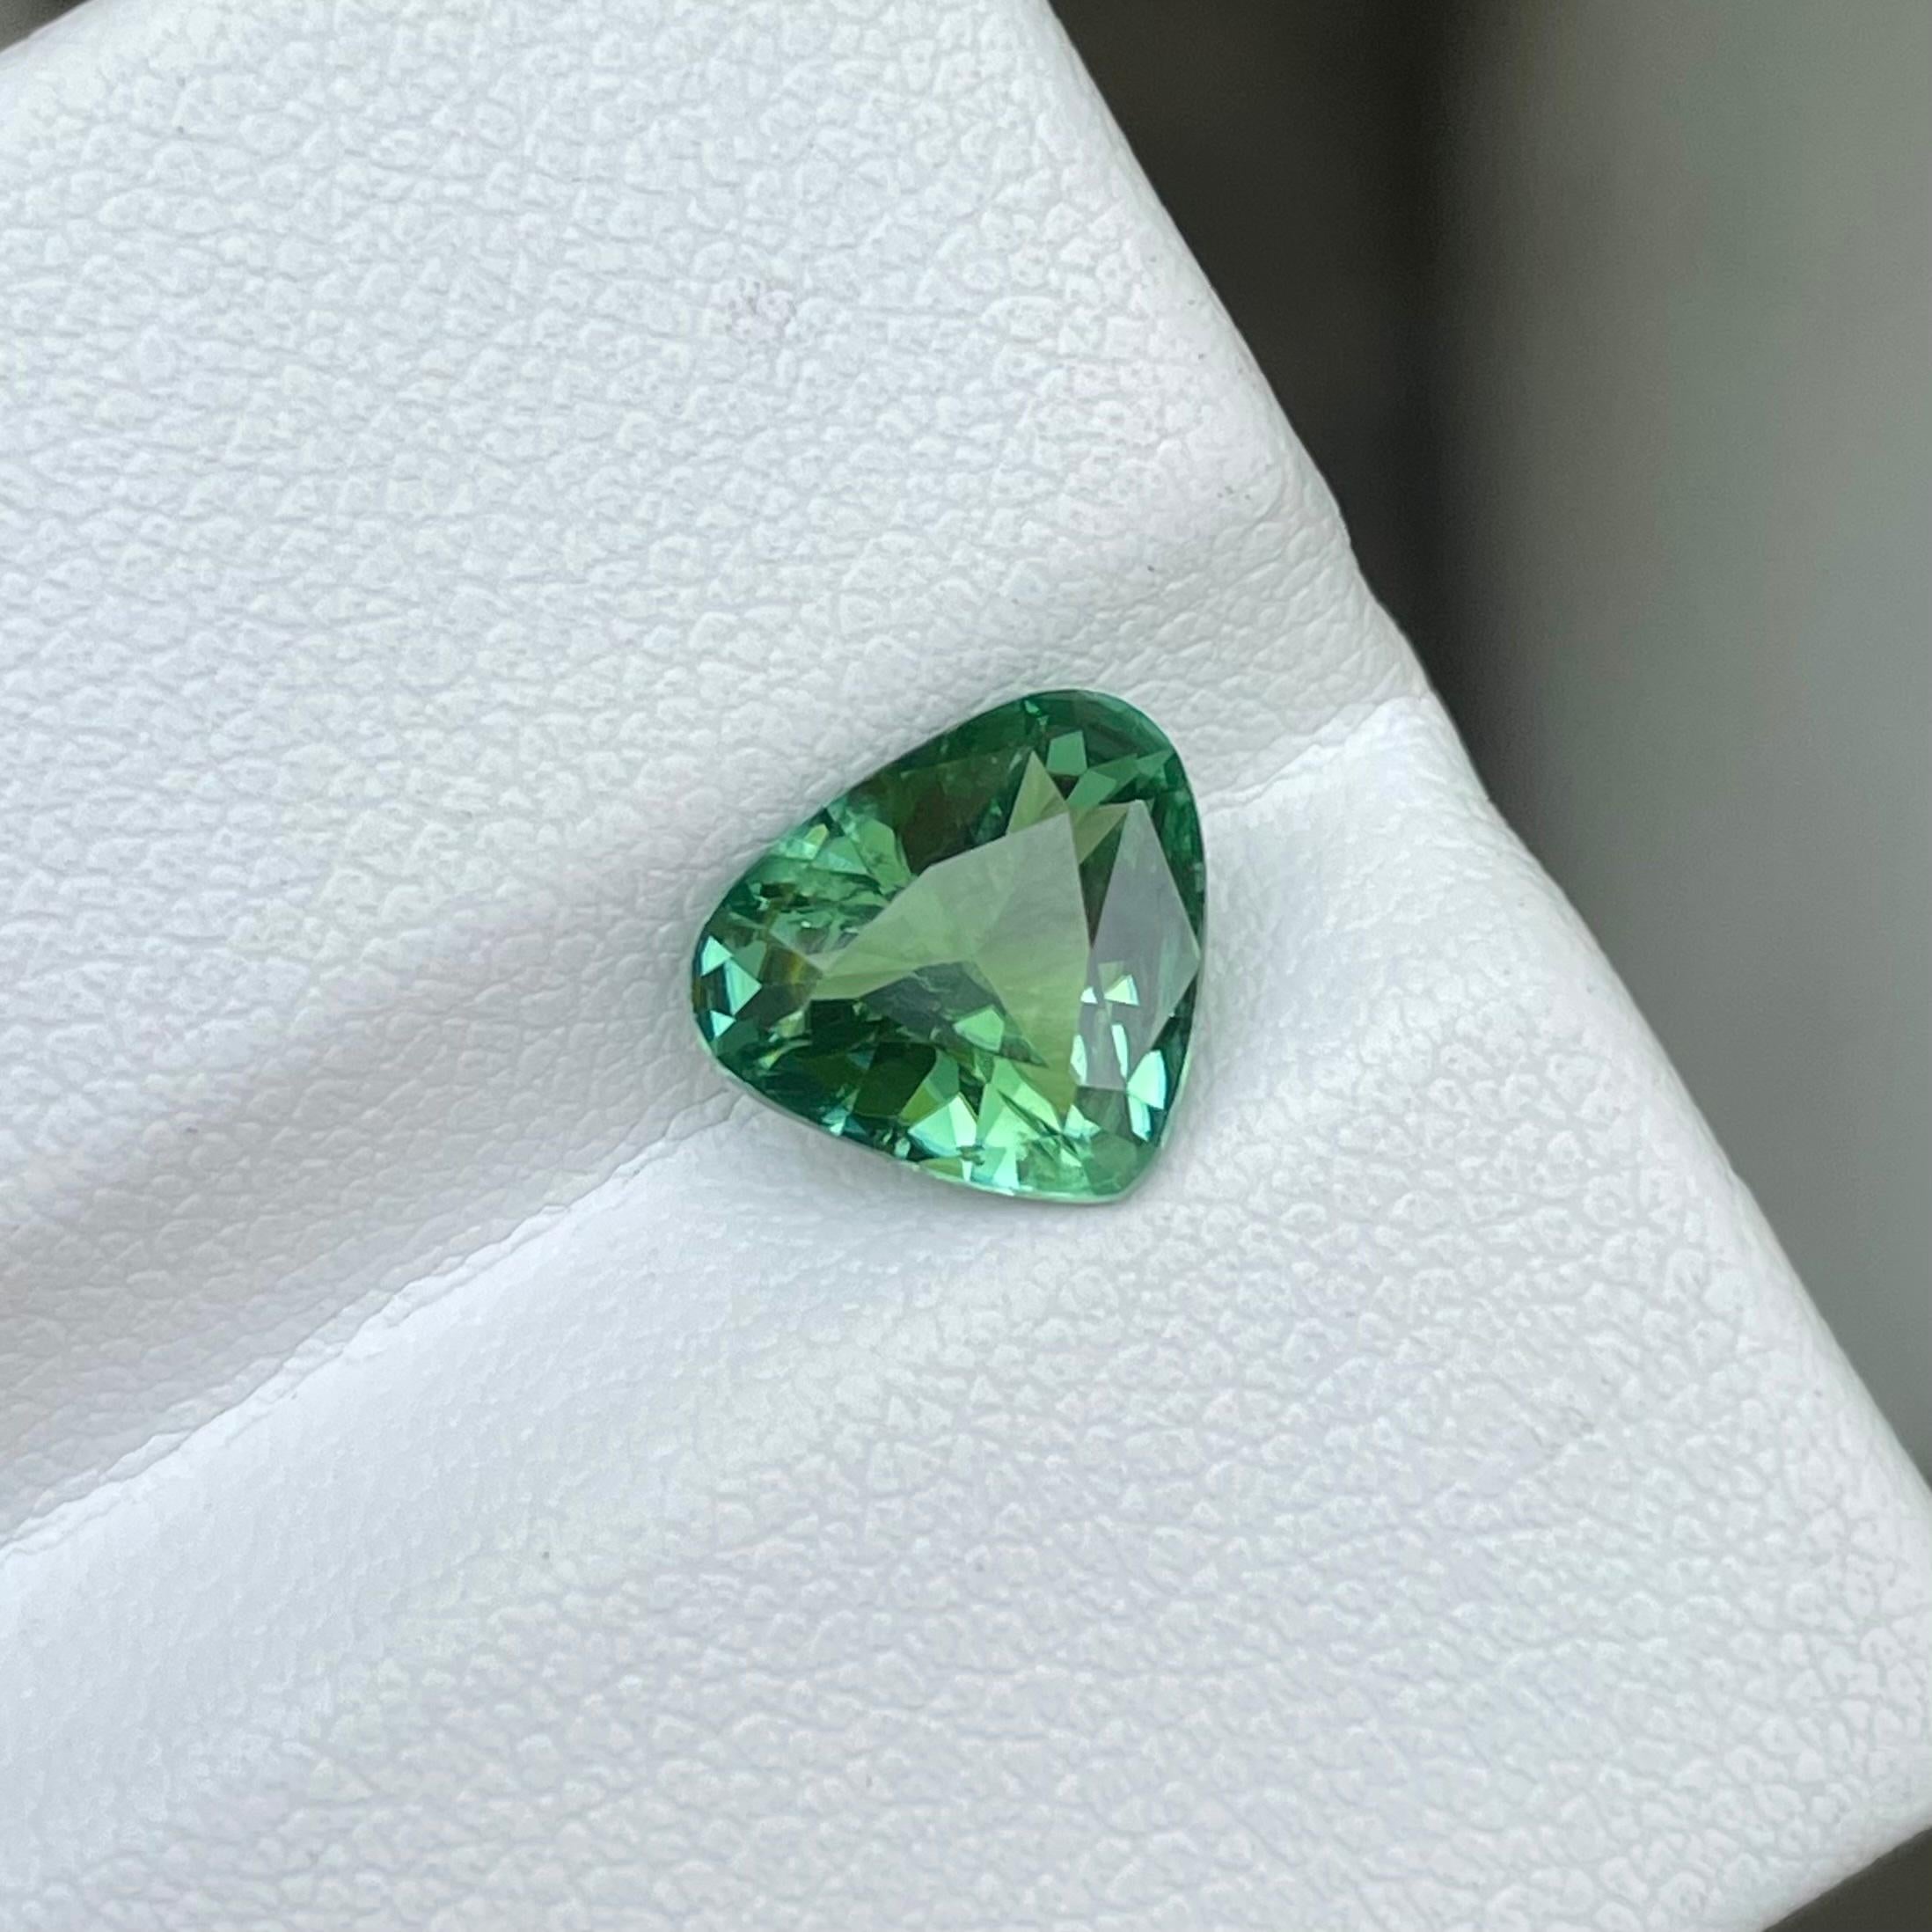 Weight 1.85 carats 
Dimensions 8.2 x 9.3 x 4.4 mm
Treatment None 
Origin Afghanistan 
Clarity VVS (Very, Very Slightly Included)
Shape Triangular 
Cut Trilliant 




Elevate your jewelry collection with this exquisite Mint Green Tourmaline.